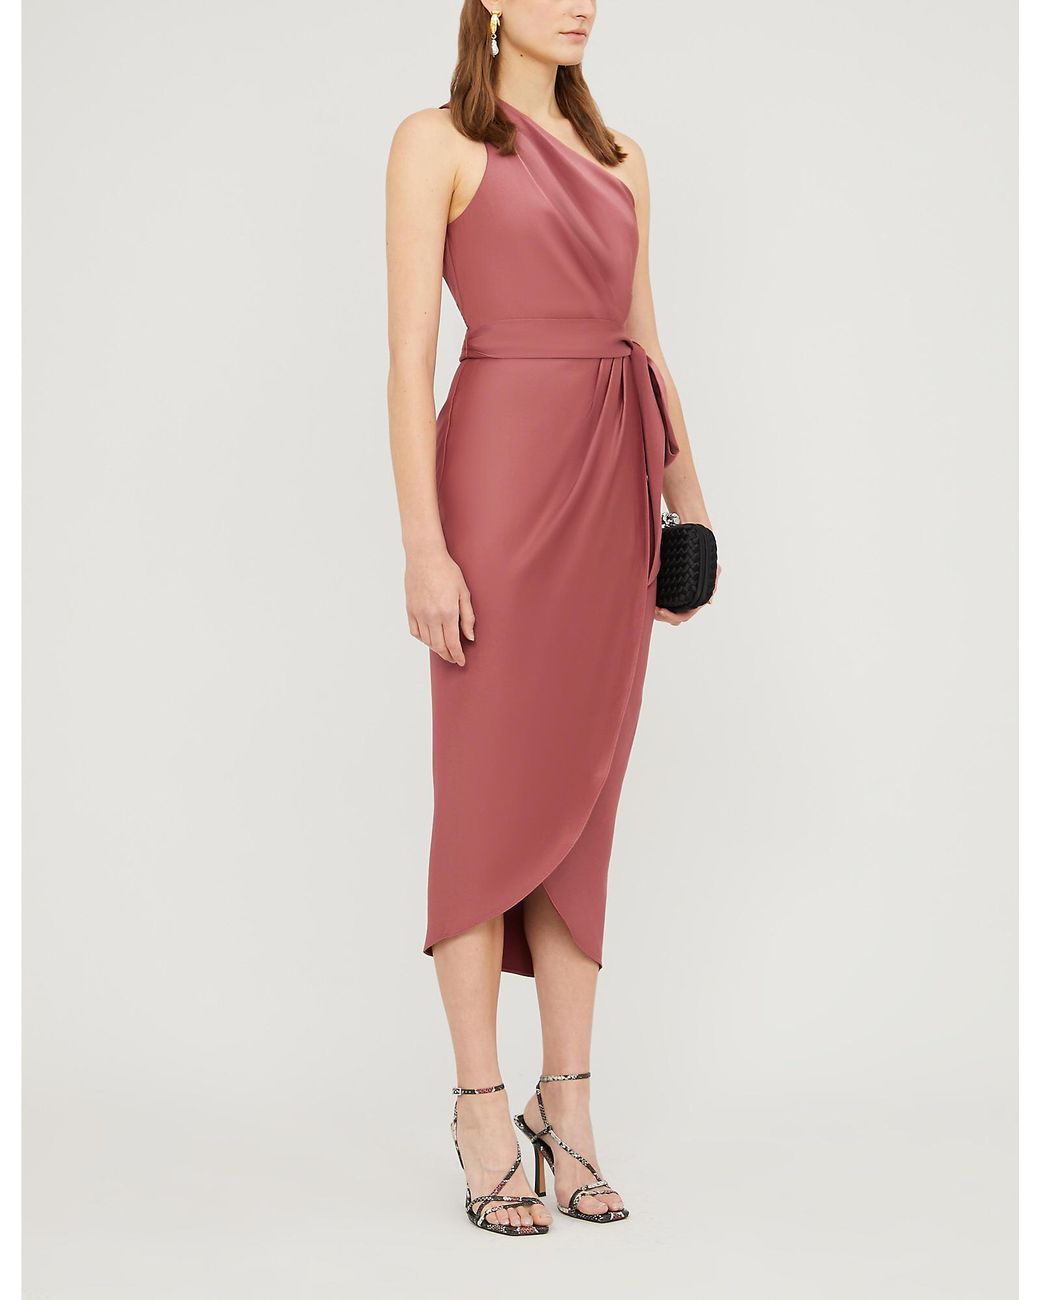 ted baker pink and red dress